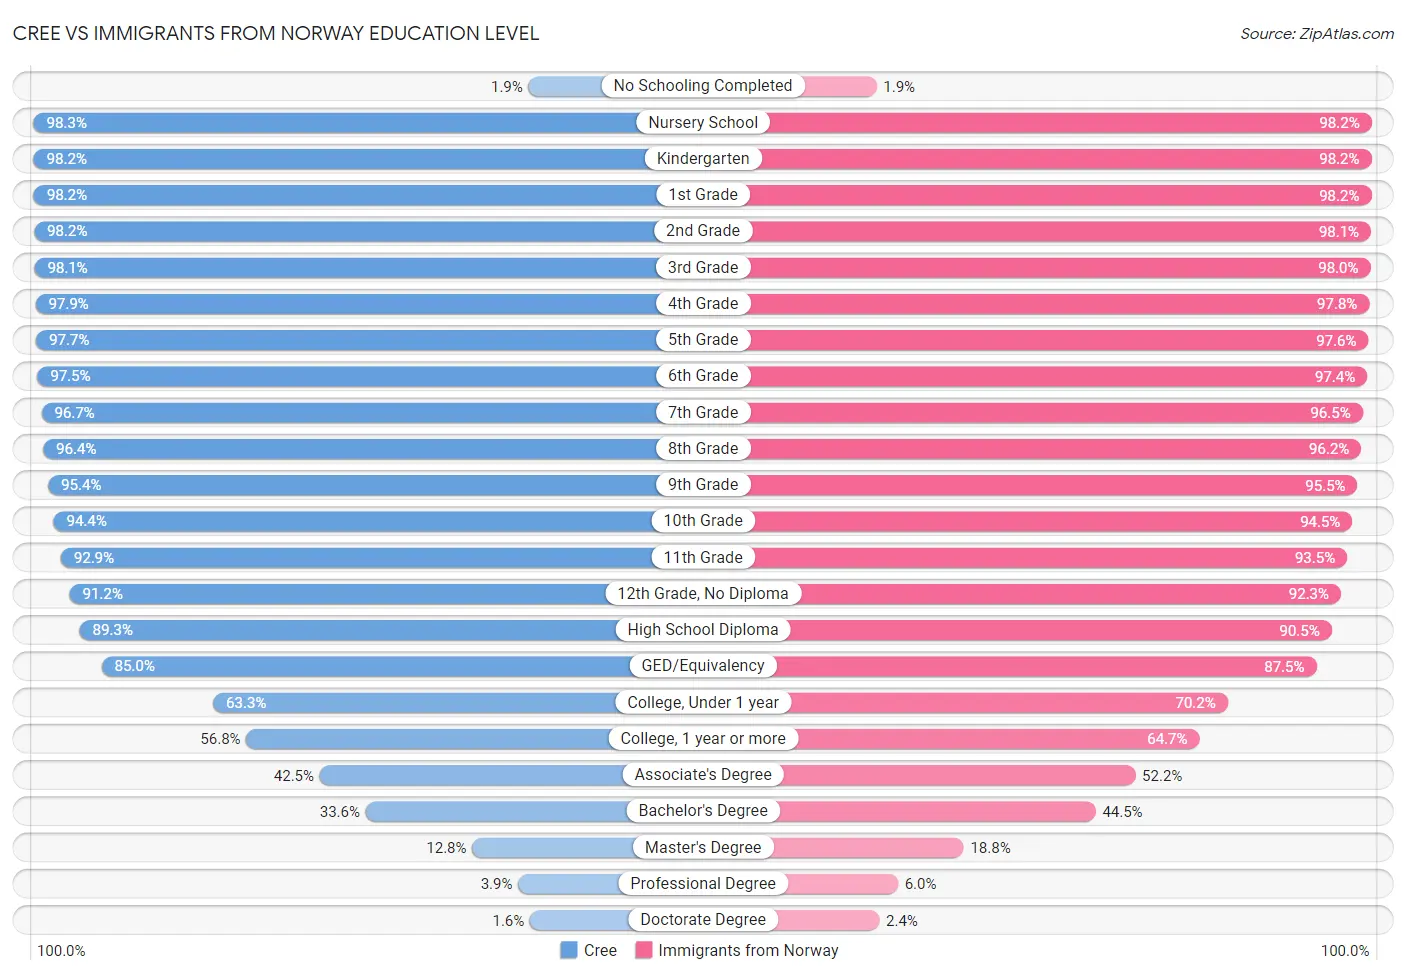 Cree vs Immigrants from Norway Education Level